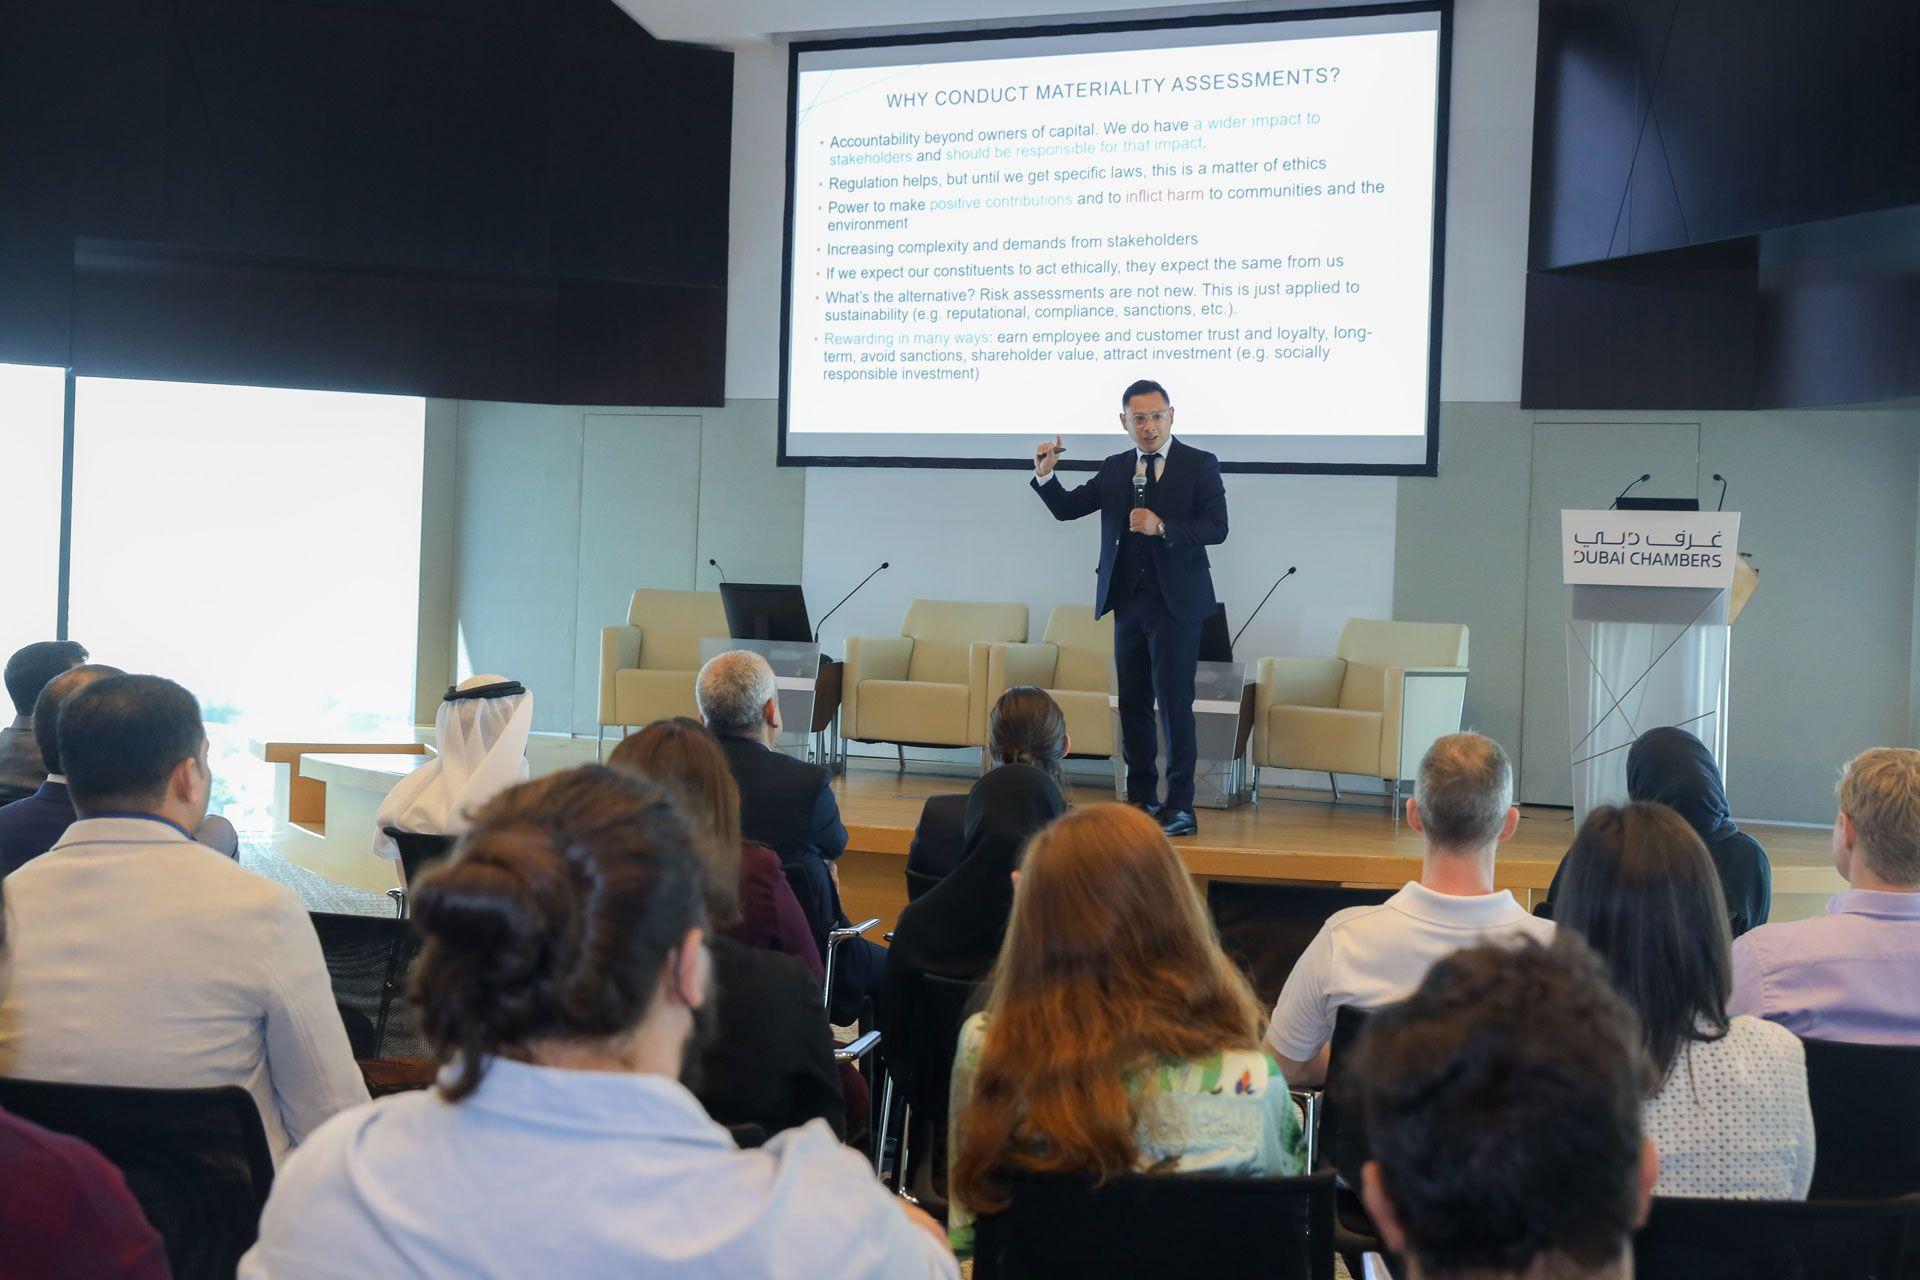 Rhoderick Romano, UG Business Faculty and Member of the Institute of Sustainable Development – Middlesex University Dubai, participated in a Multi Stakeholder Dialogue as part of Sustainability Week 2022 at the Dubai Chamber of Commerce Centre for Responsible Business on 25th November 2022.